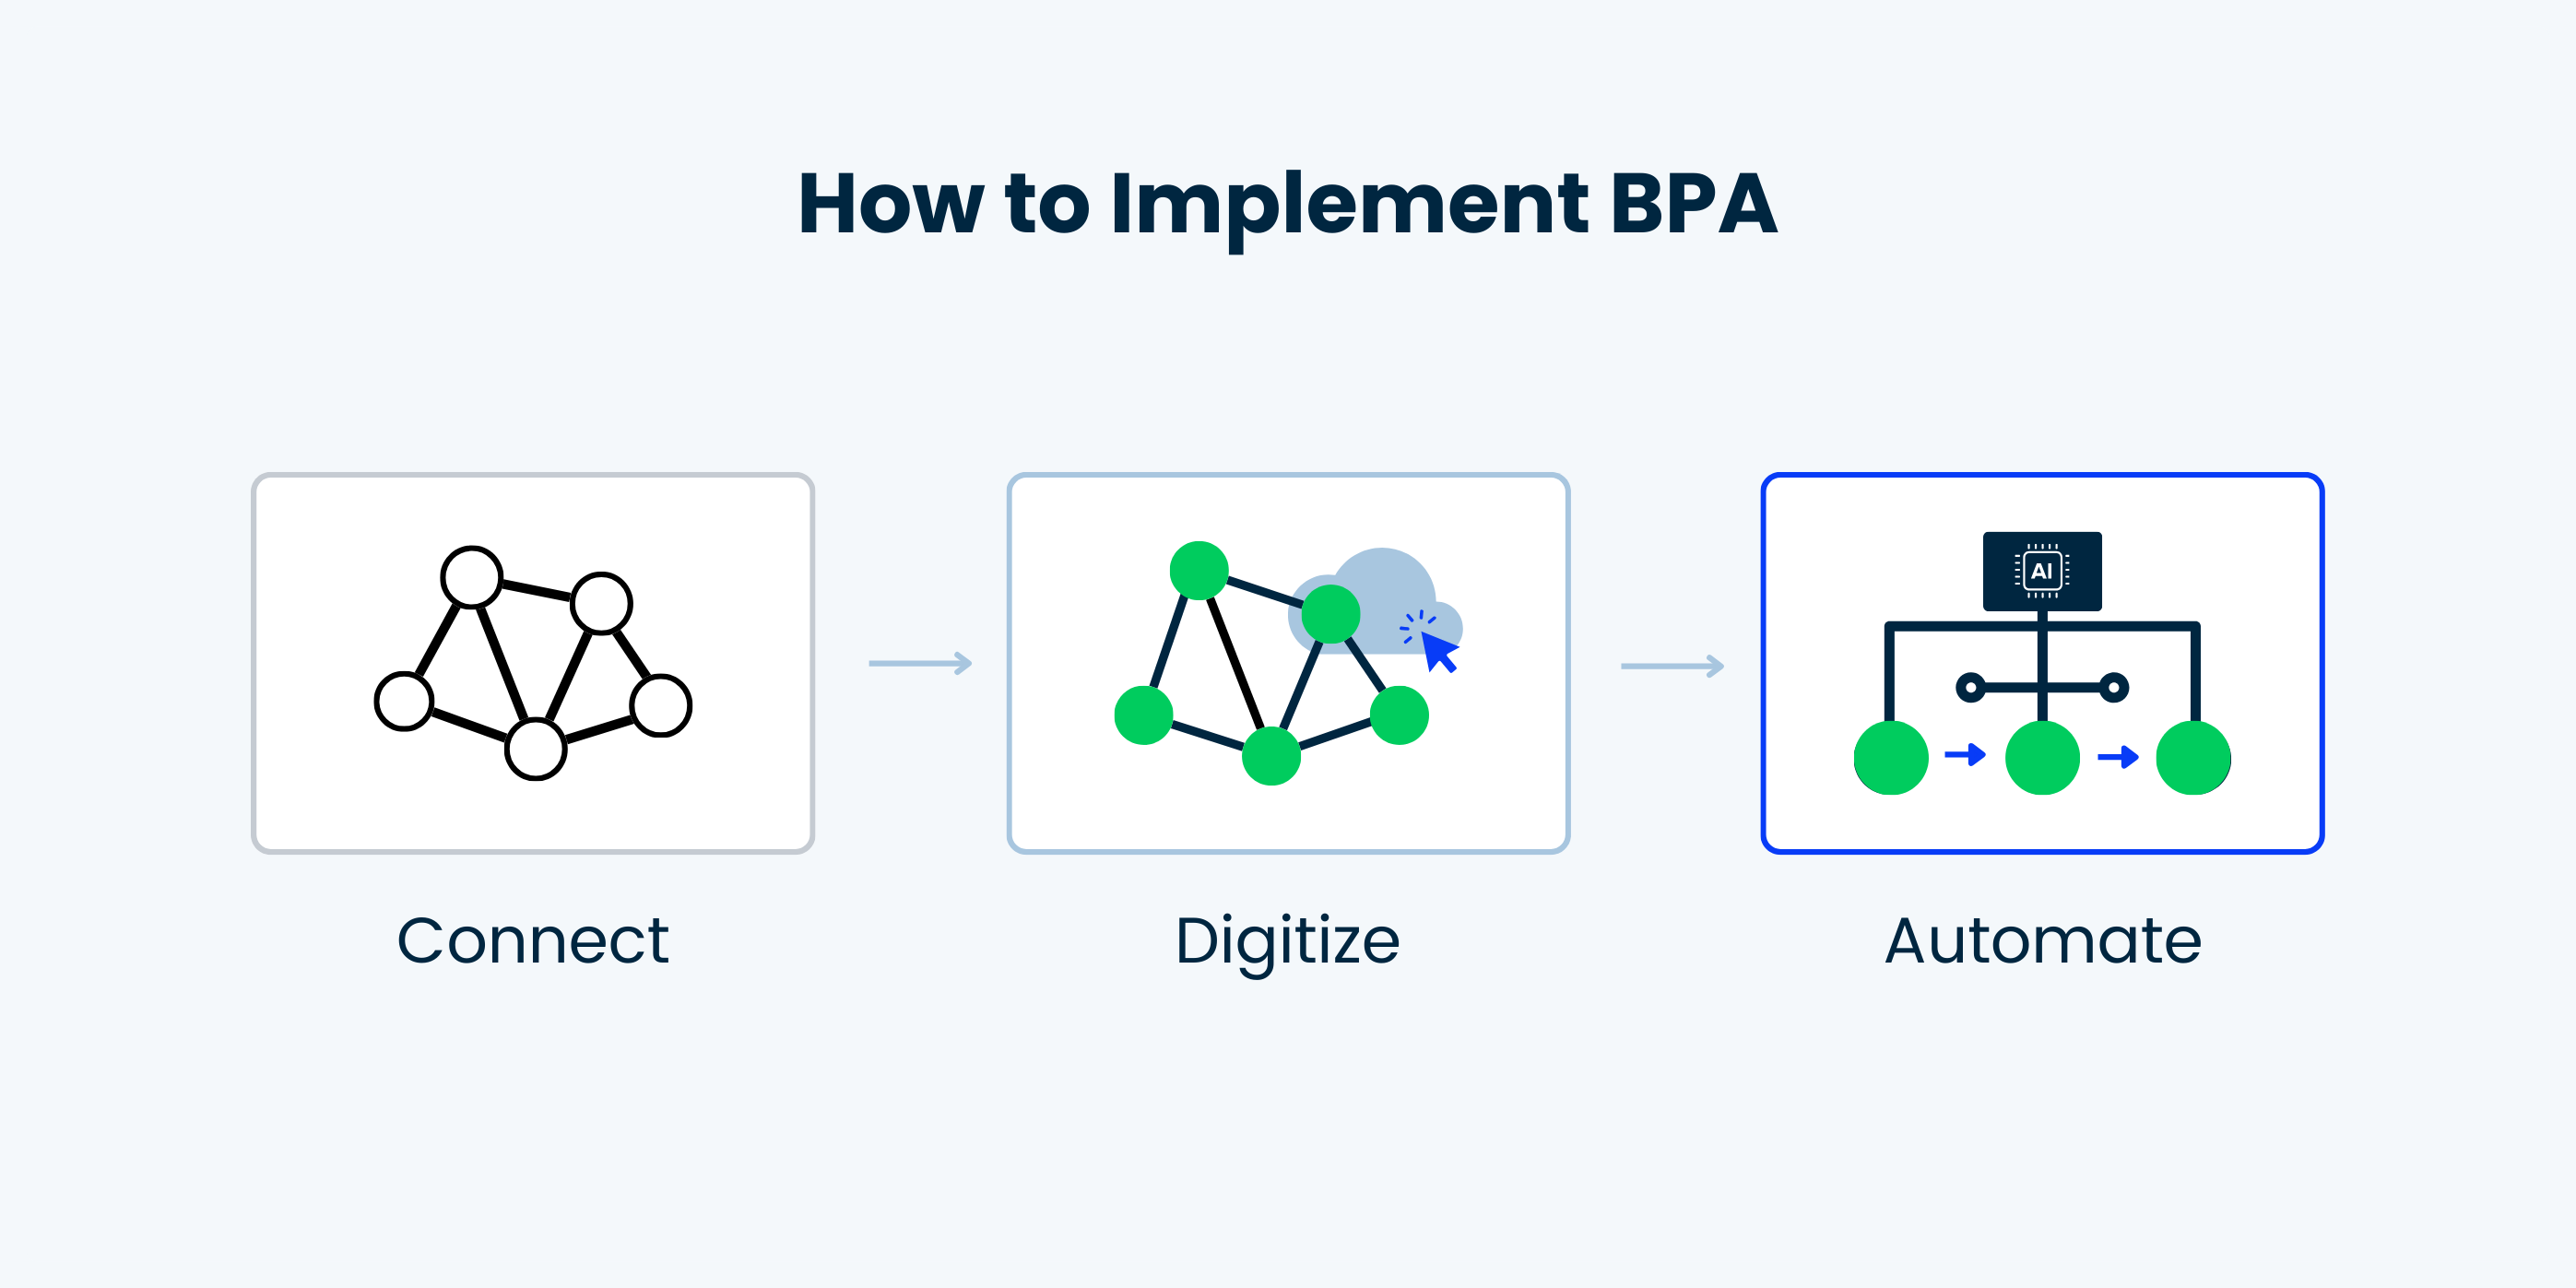 How to Implement BPA